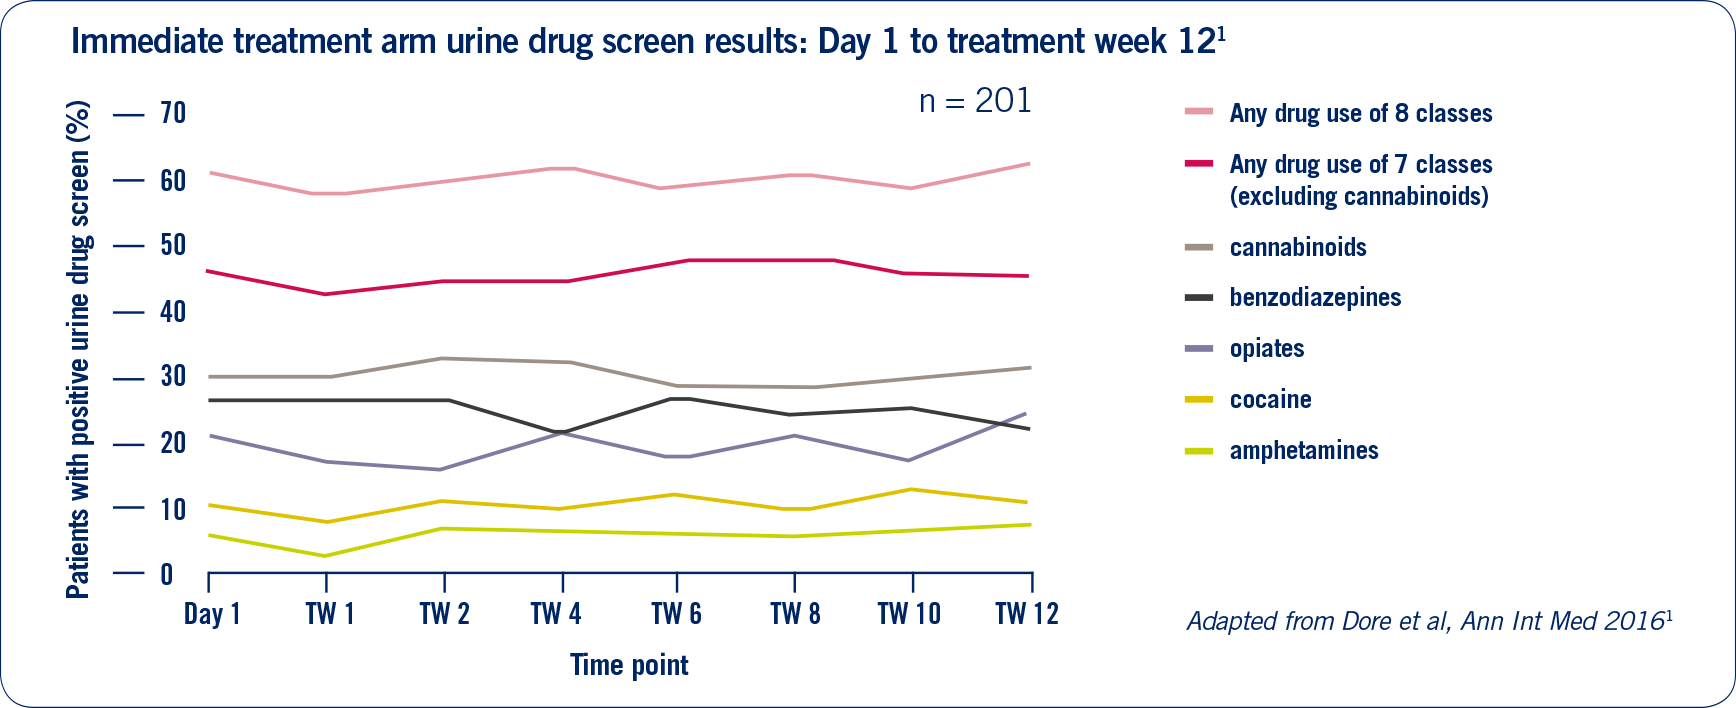 Consistent use of class 8 and class 7 drugs, benzodiazepines, opiates, cocaine and amphetamines throughout the 12 weeks of treatment 